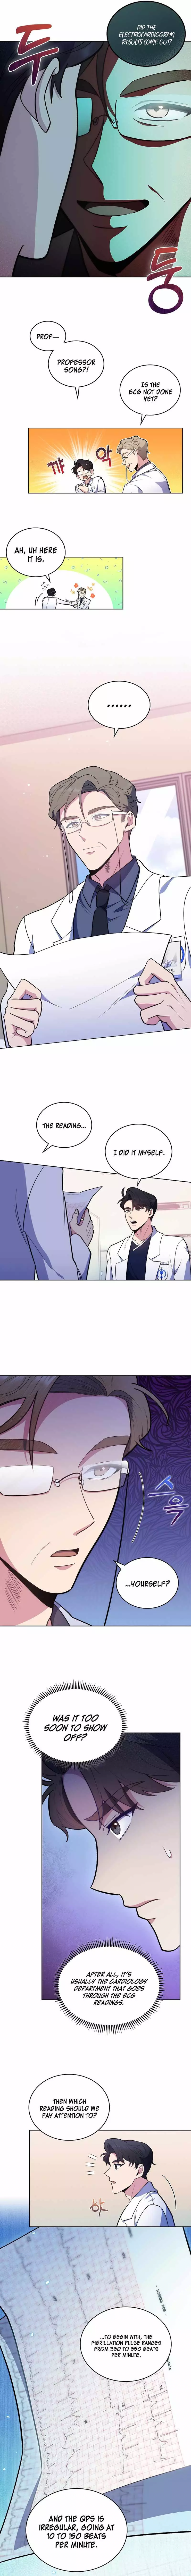 Level-Up Doctor (Manhwa) - 26 page 8-ce150994